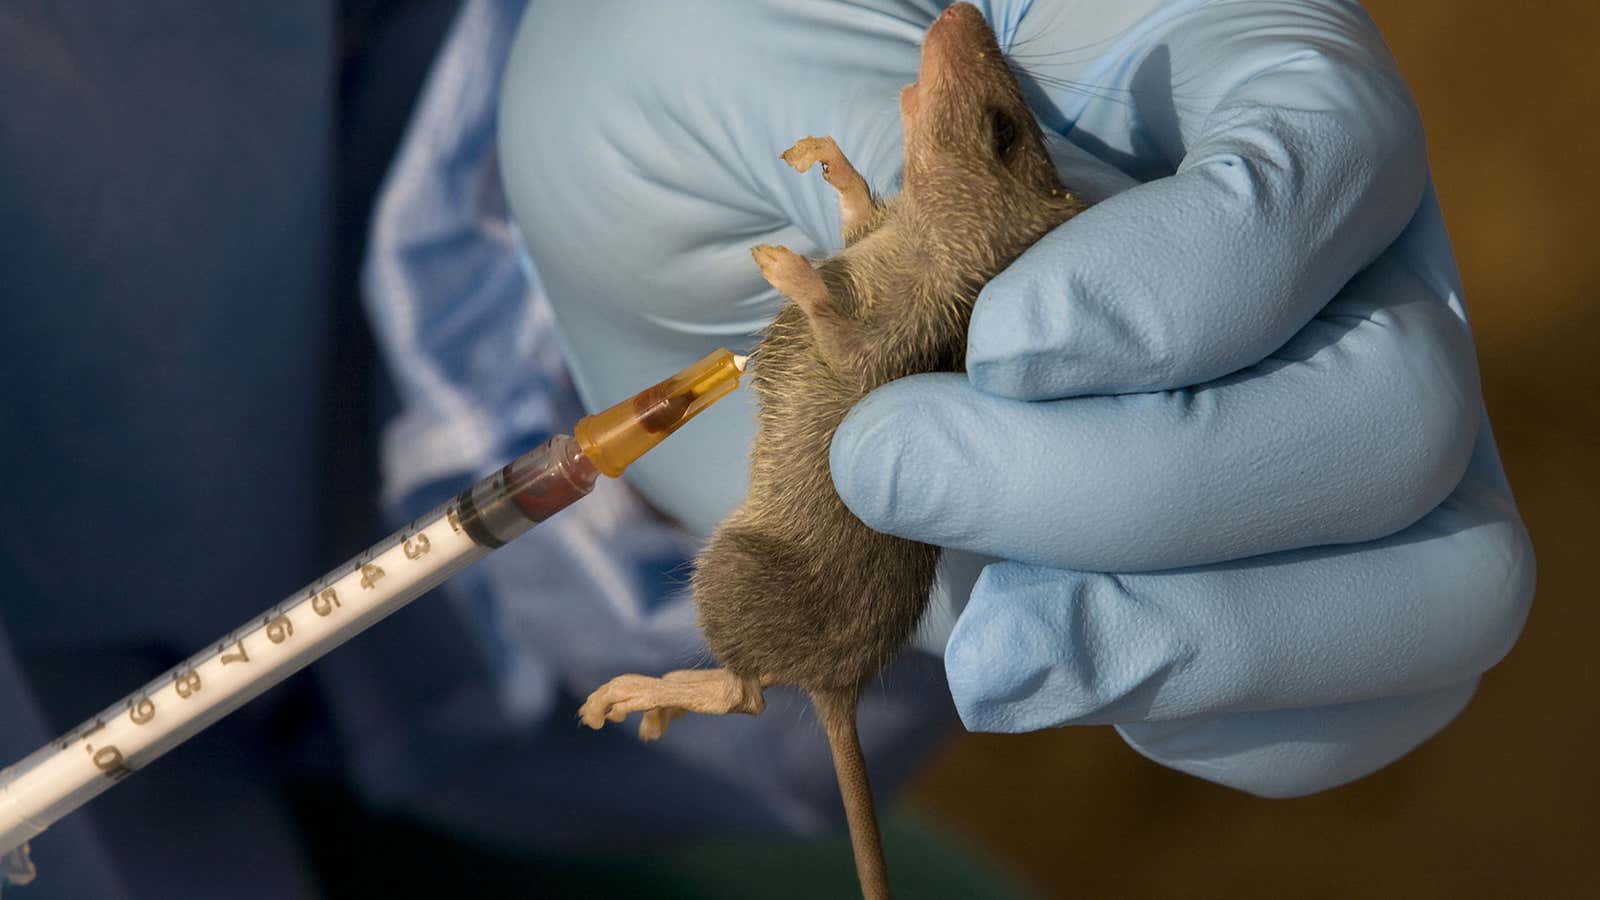 Lassa fever is spread through contact with infected common African rats.